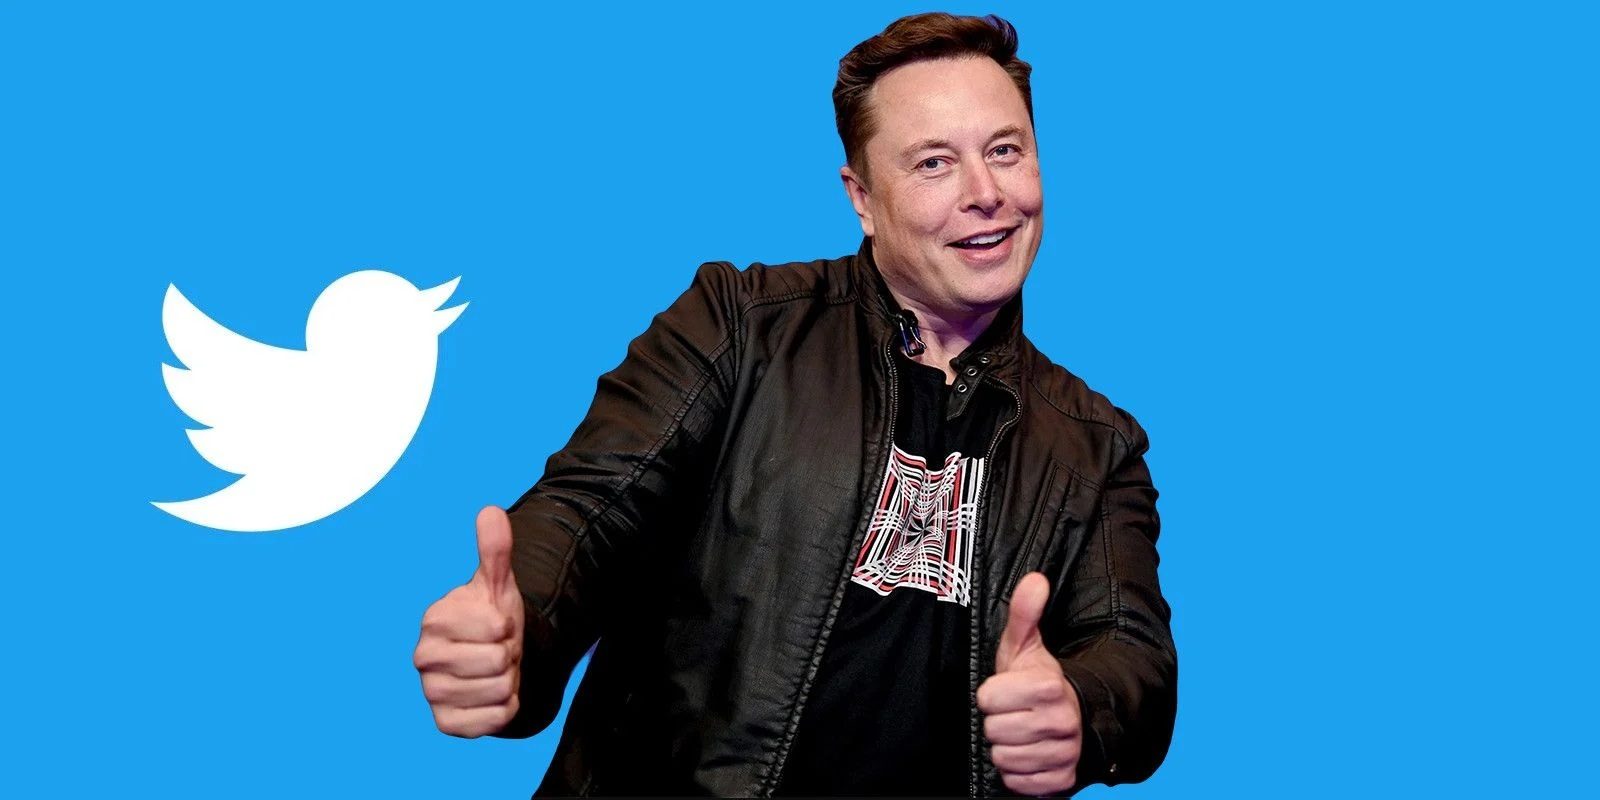 Twitter Falls In The Lap For Elon Musk. What’s Next?